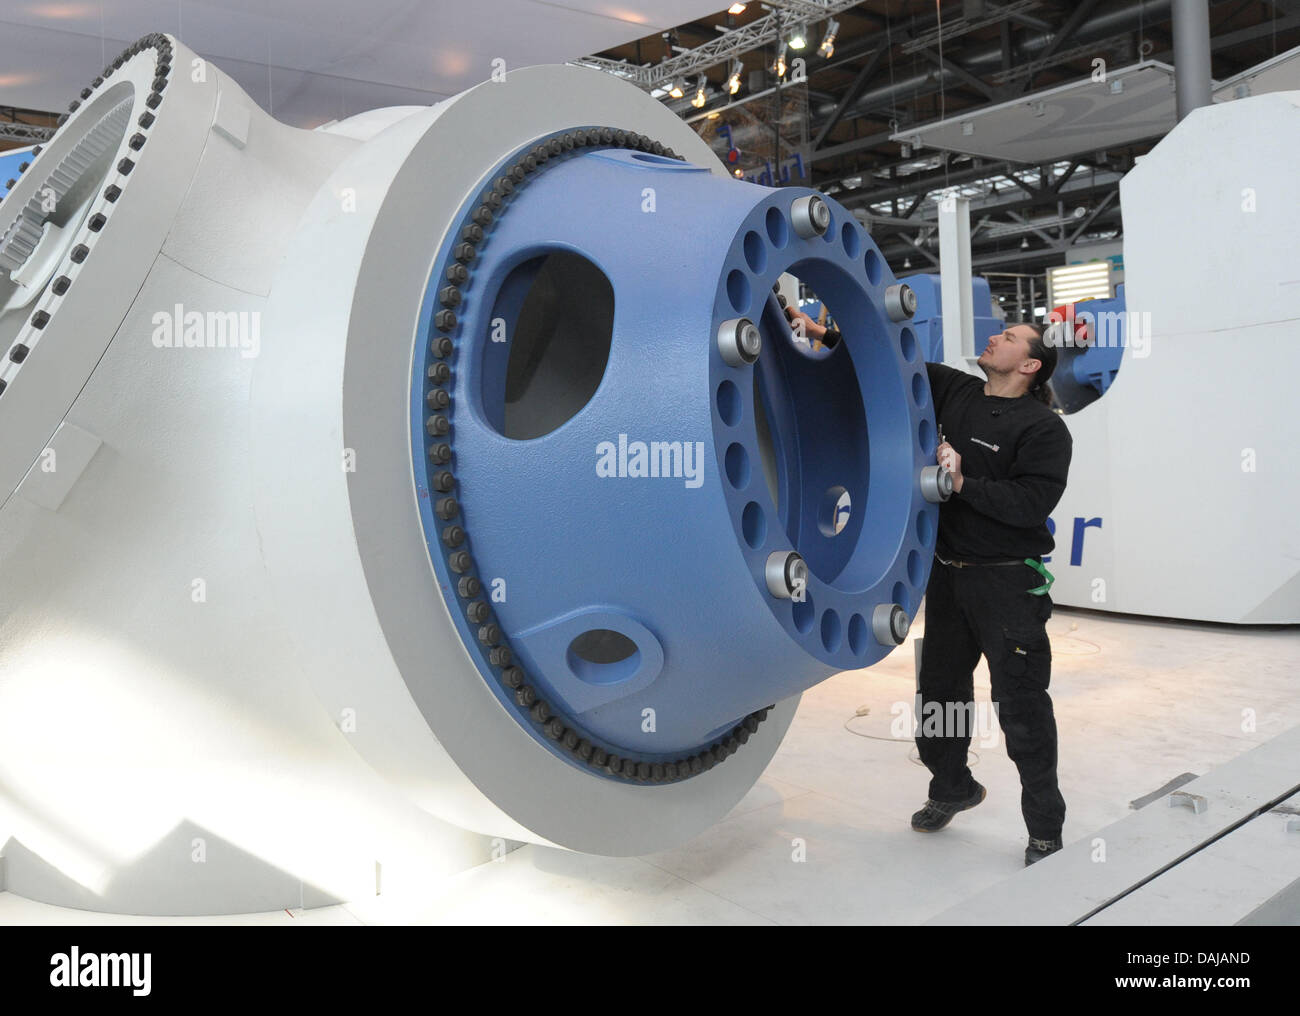 The rotor hub of a wind turbine is seen at the stand for the company Fuhrlander at the convention center for the Hanover Fair 2011 in Hanover, Germany, 30 March 2011. More than 6500 exhibitors from 65 countries are expected in the coming weeks at the world's largest industry fair in Hanover, Germany. Photo: Peter Steffen Stock Photo